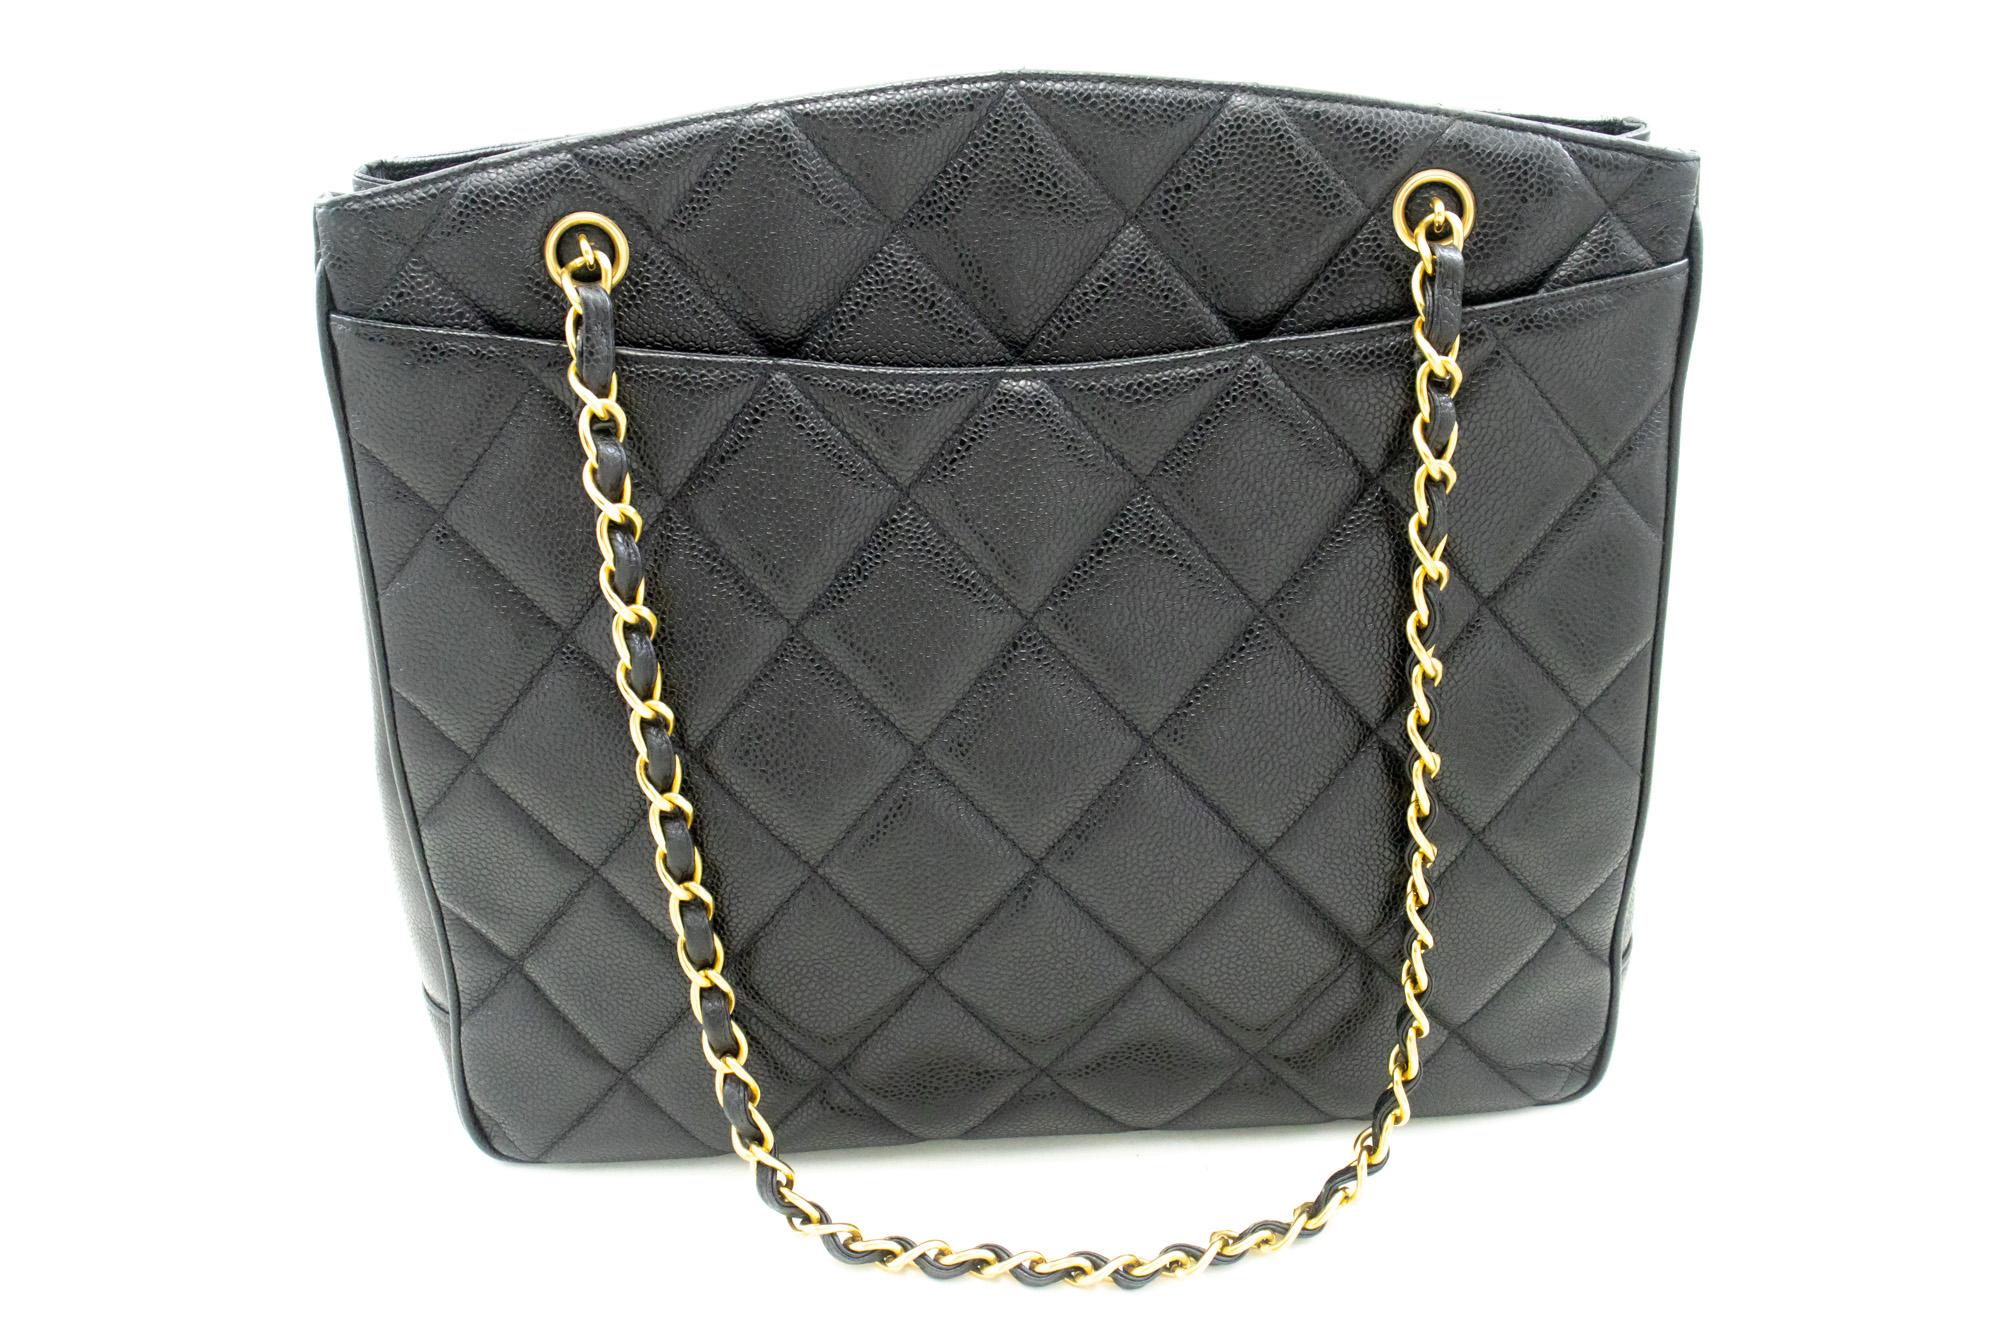 CHANEL Caviar Large Chain Shoulder Bag Black Quilted Leather In Good Condition For Sale In Takamatsu-shi, JP